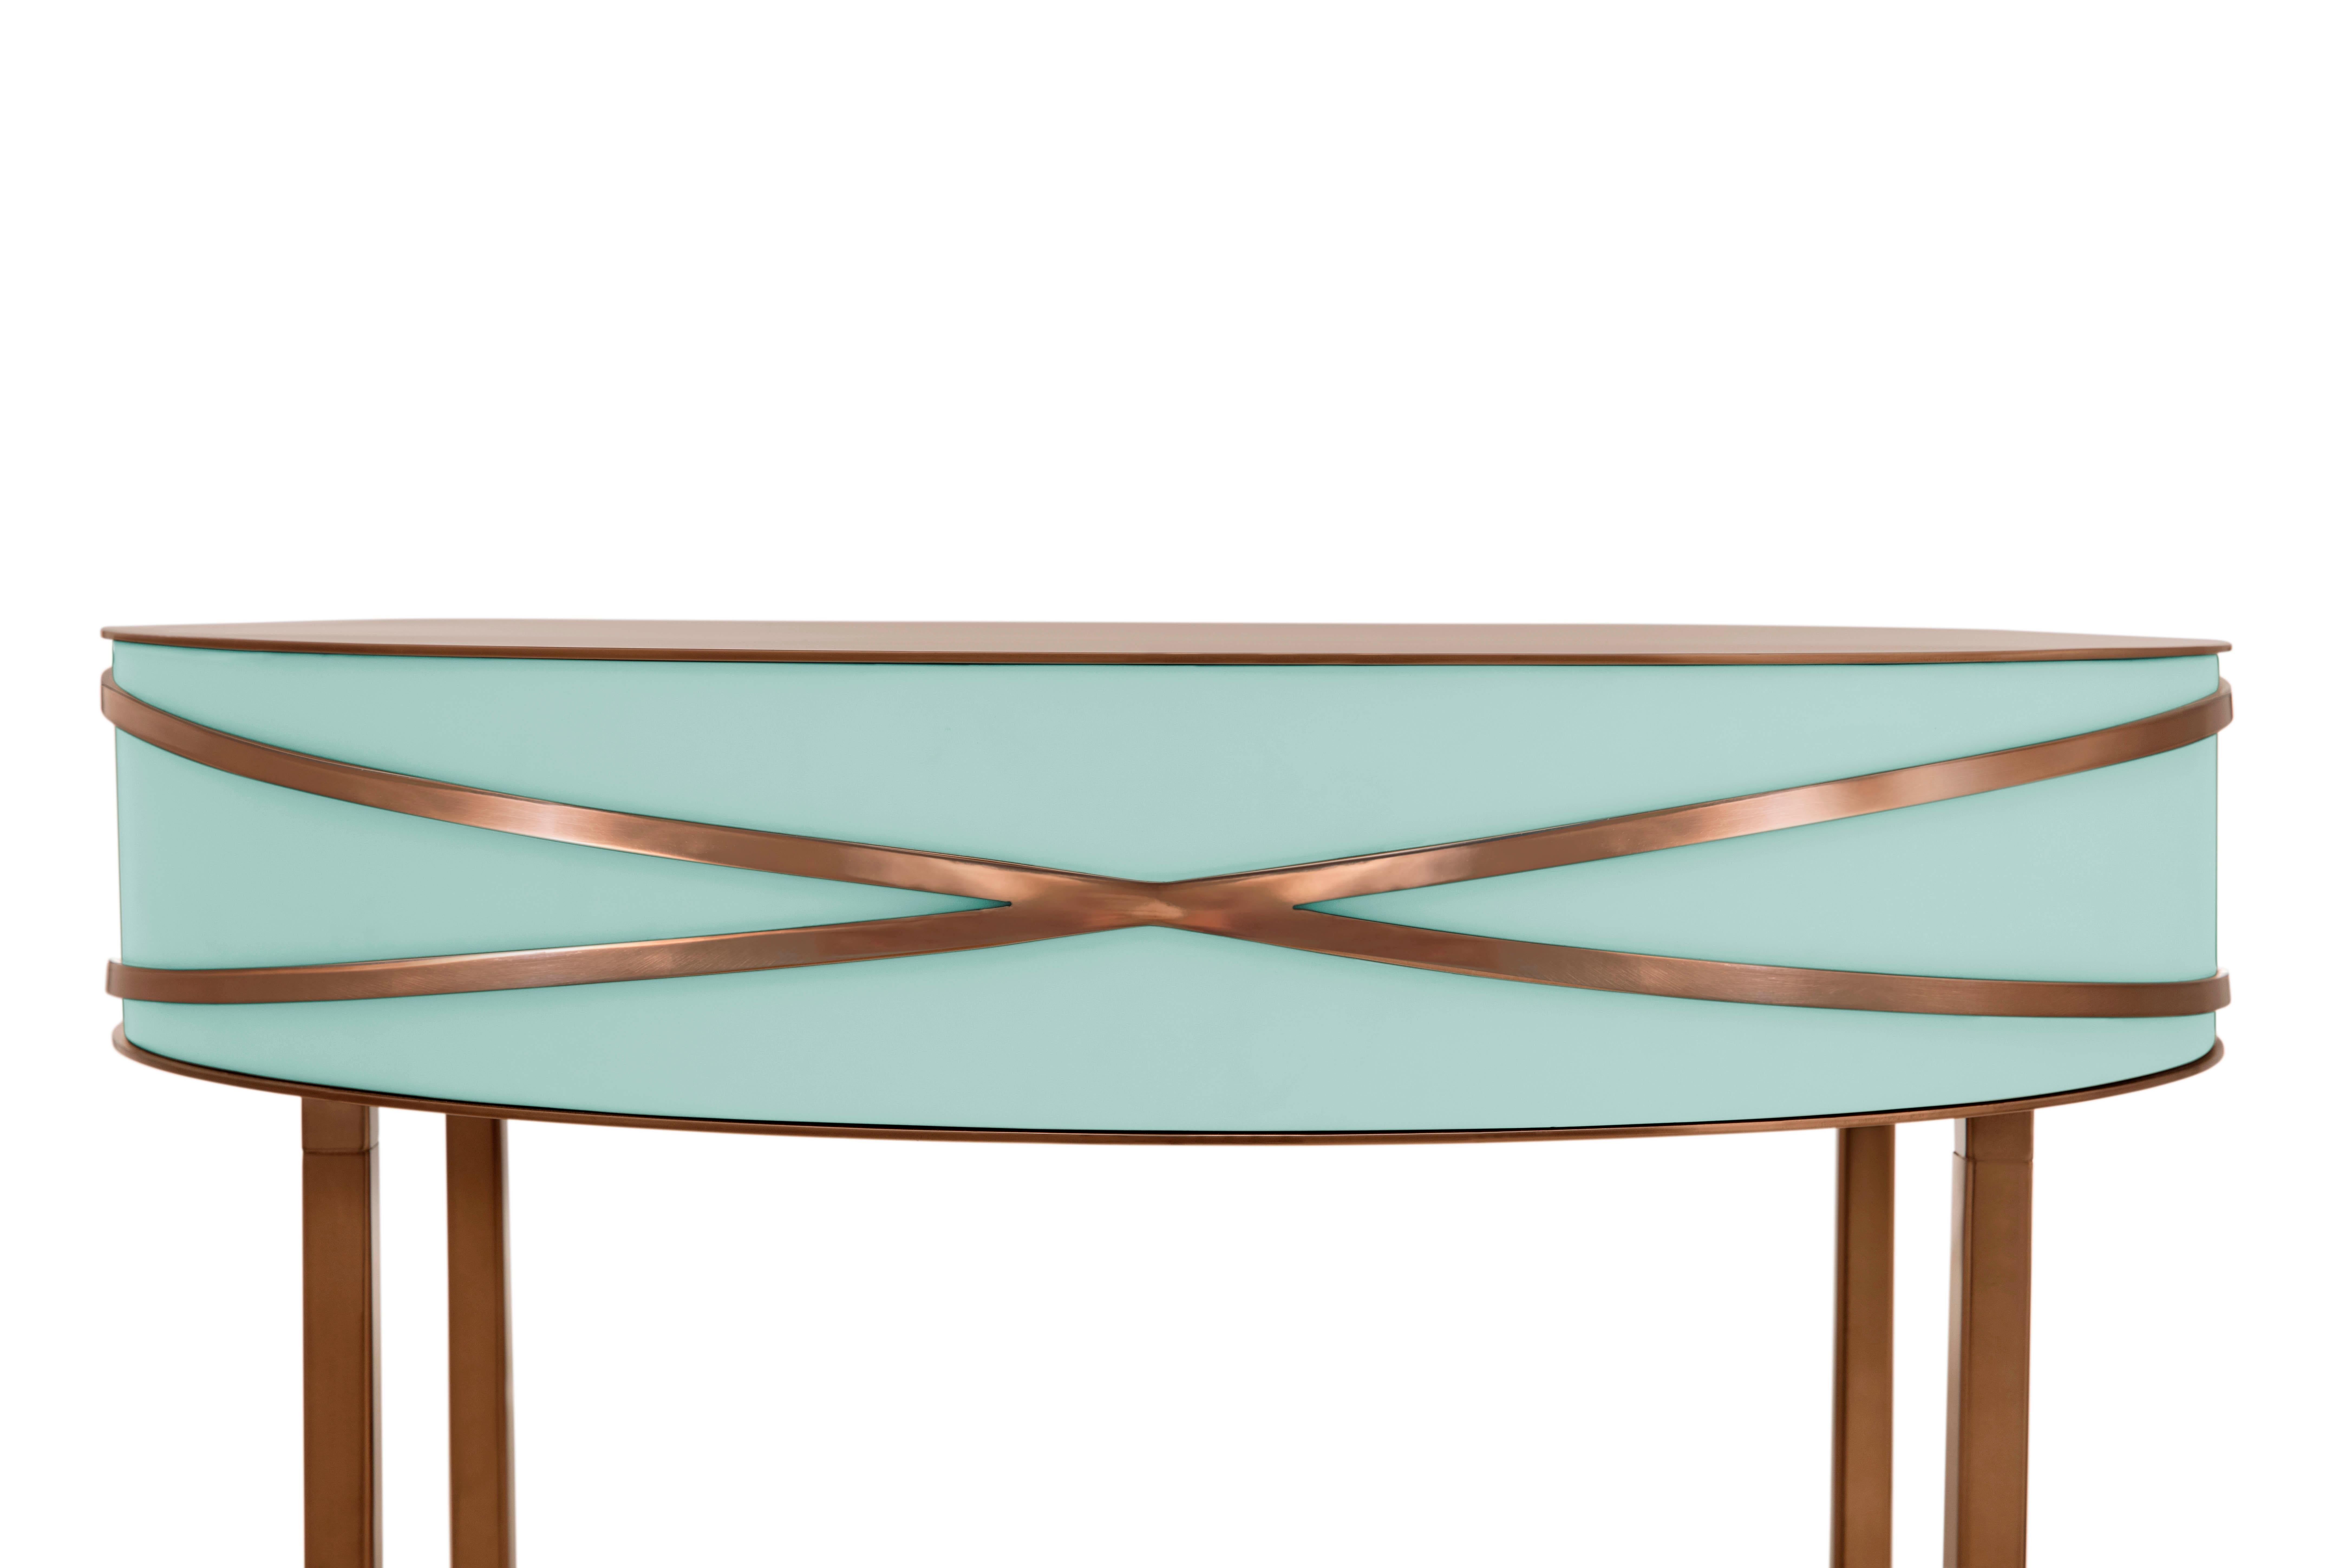 Stella Mint Green Console or Bedside Table with Rose Gold Trims by Nika Zupanc is a mint green console table with a drawer, and metal trims in rose gold.

Nika Zupanc, a strikingly renowned Slovenian designer, never shies away from redefining the